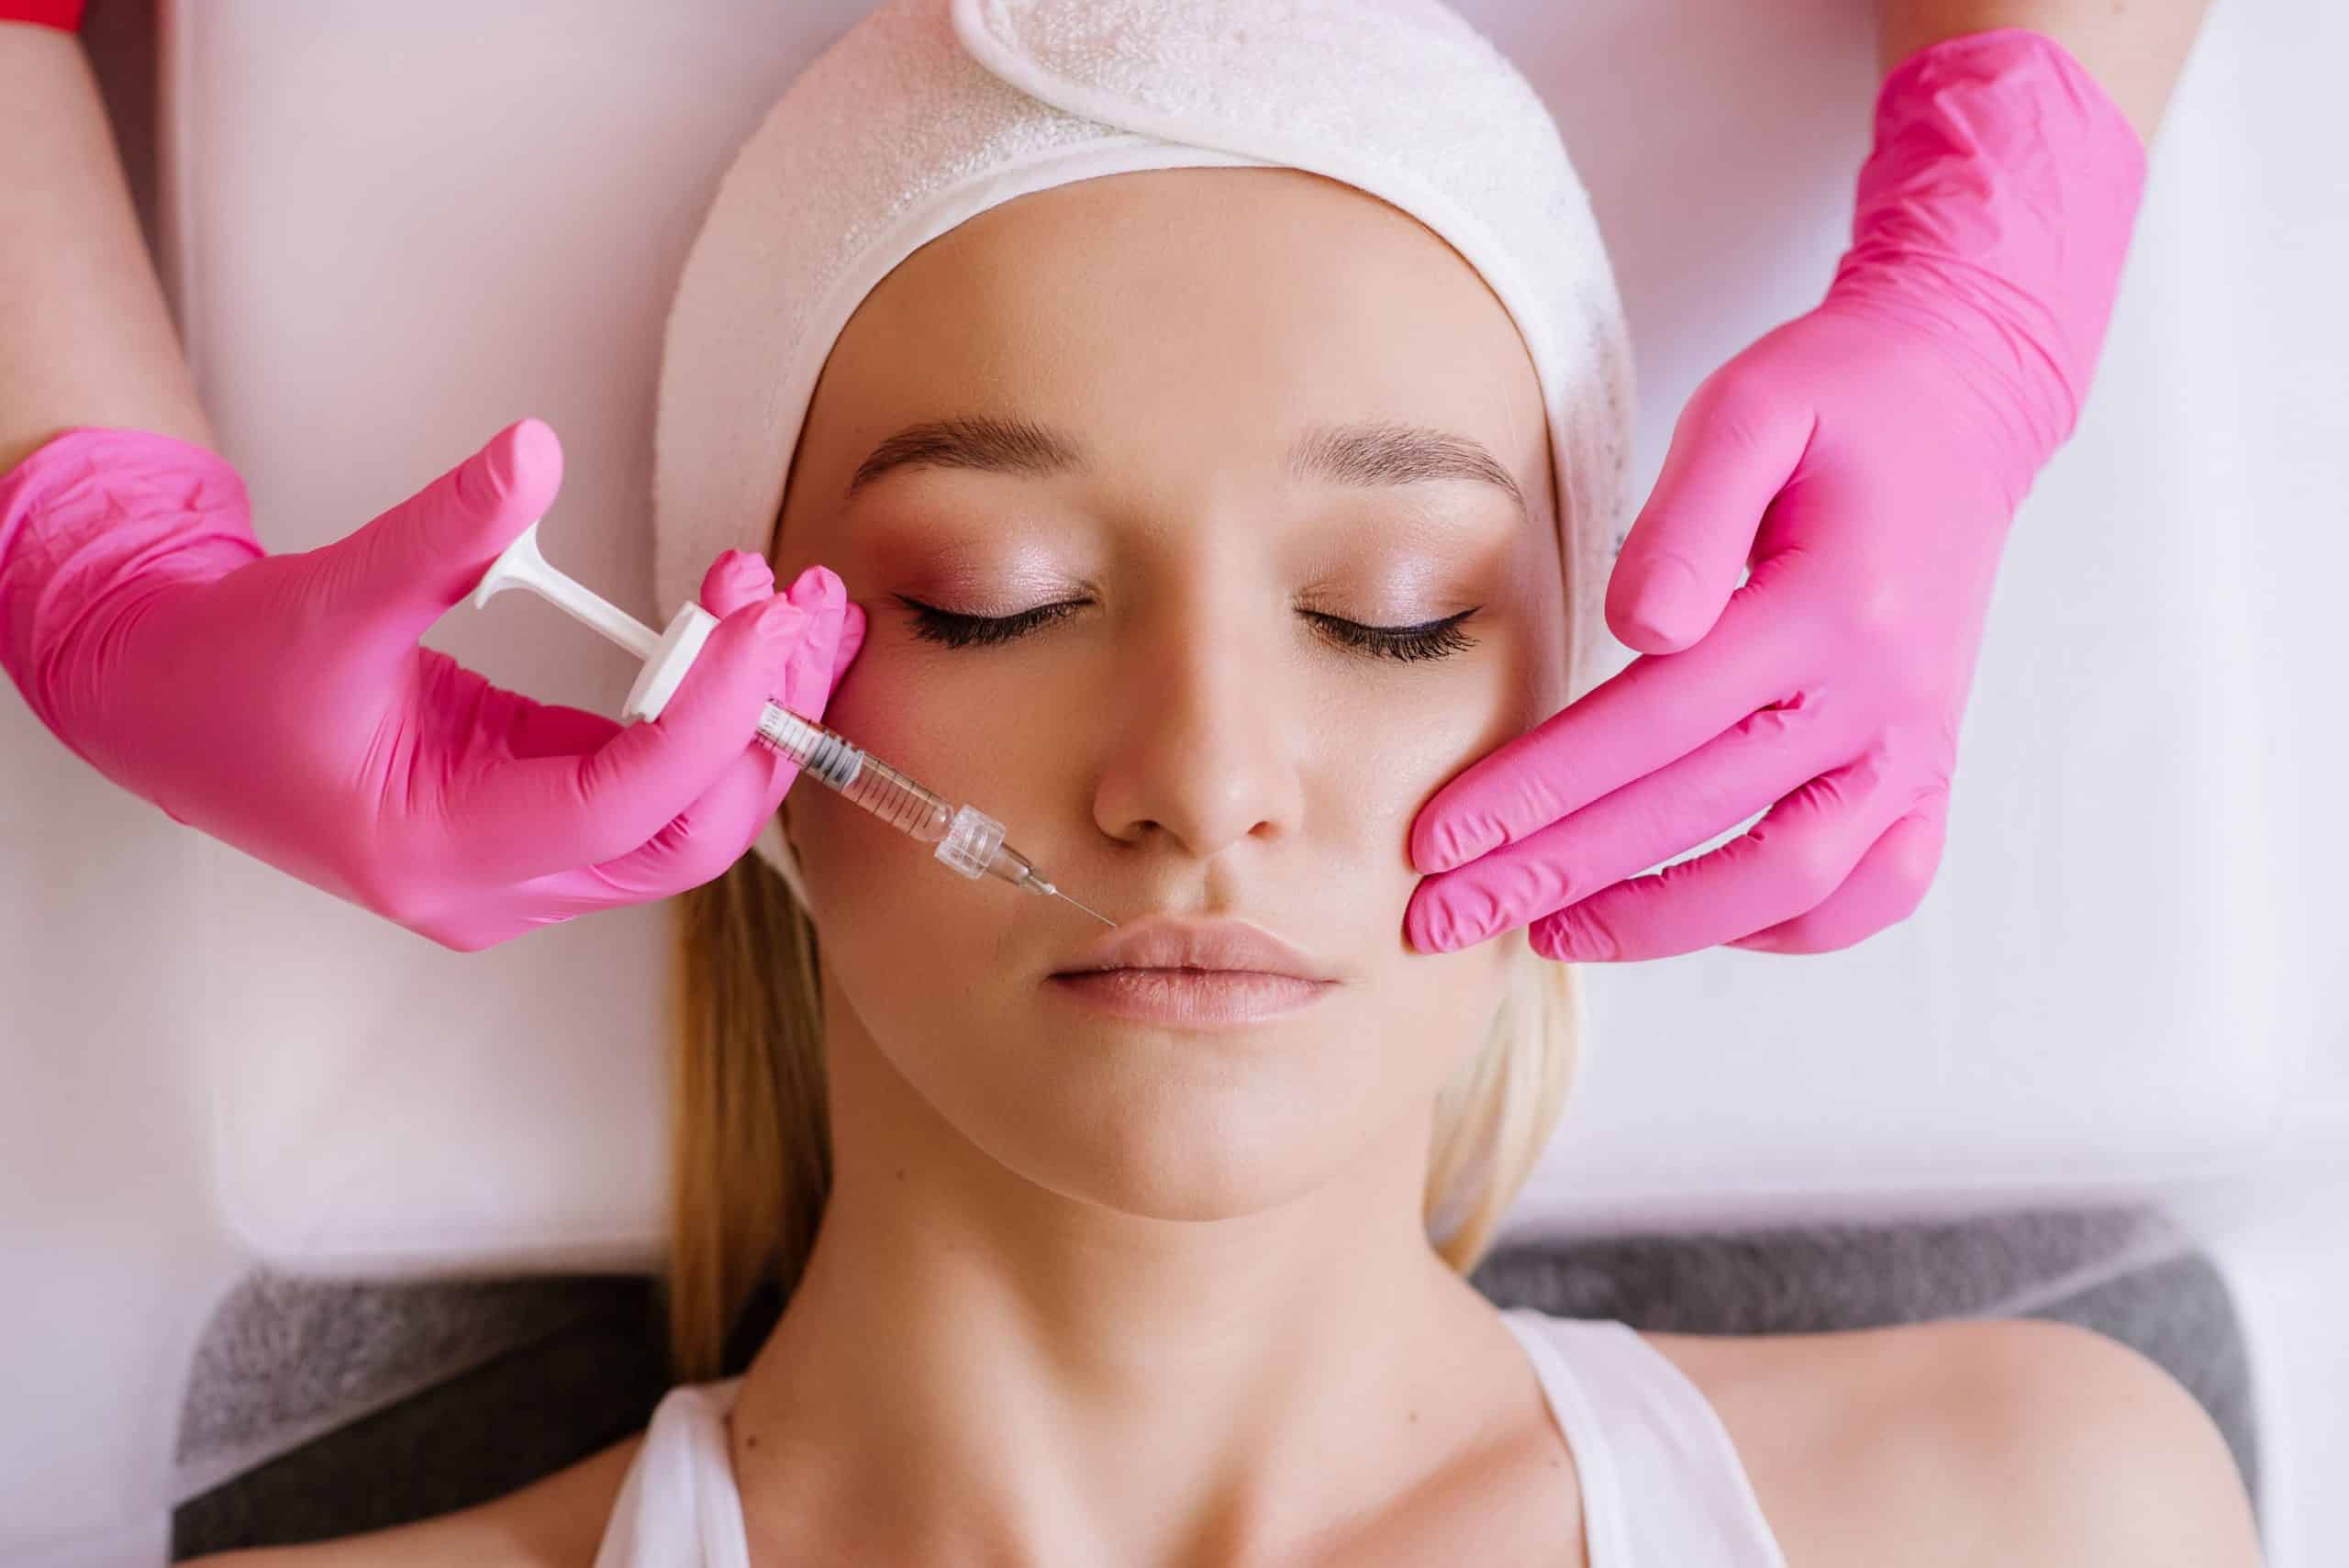 Can I Use Dermal Fillers Under The Eyes?